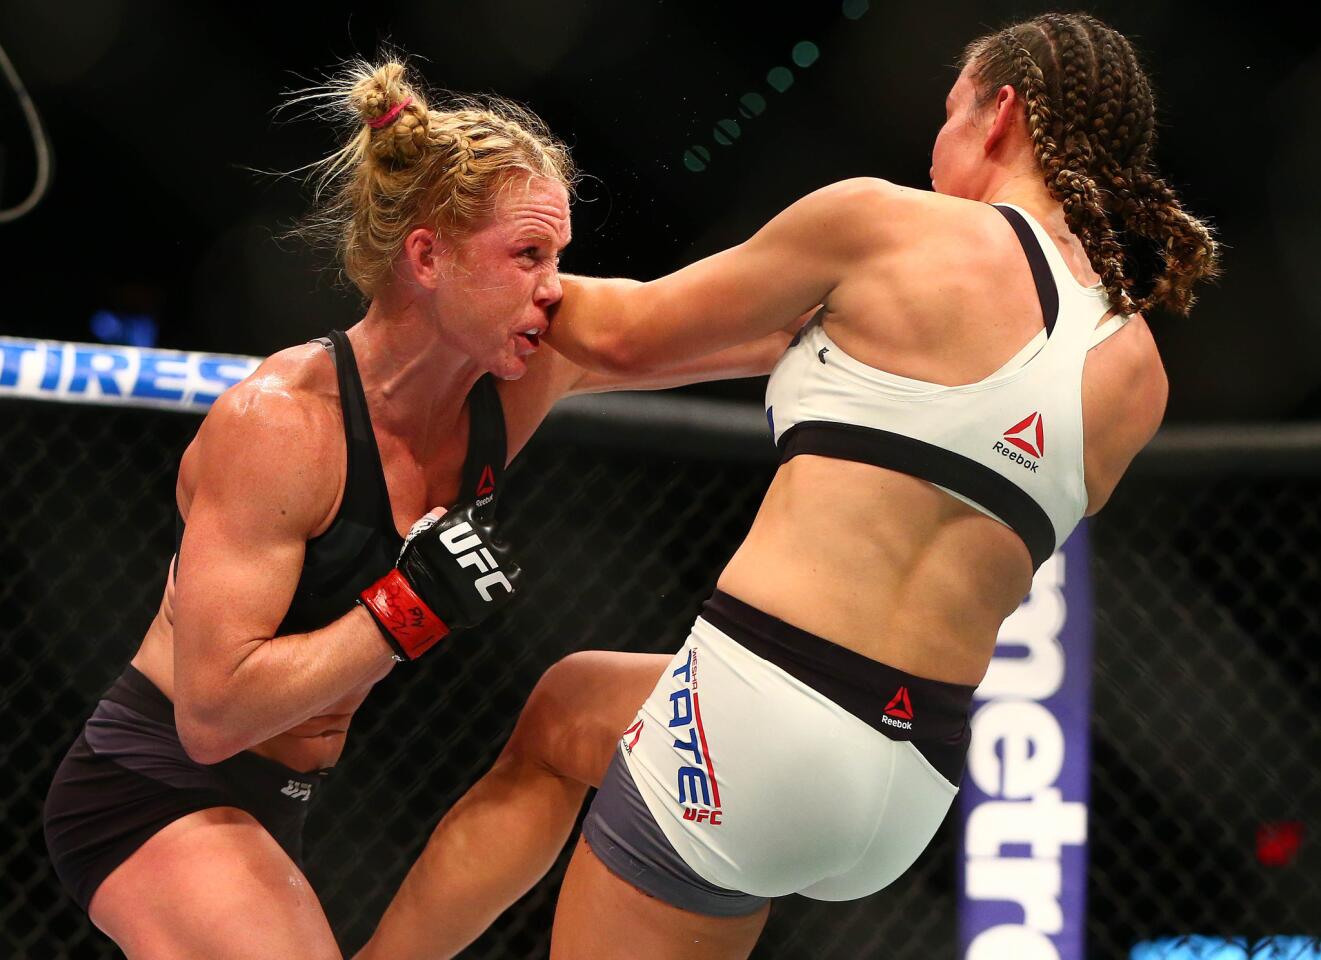 Holly Holm moves in with a punch against Miesha Tate during UFC 196 at MGM Grand Garden Arena.